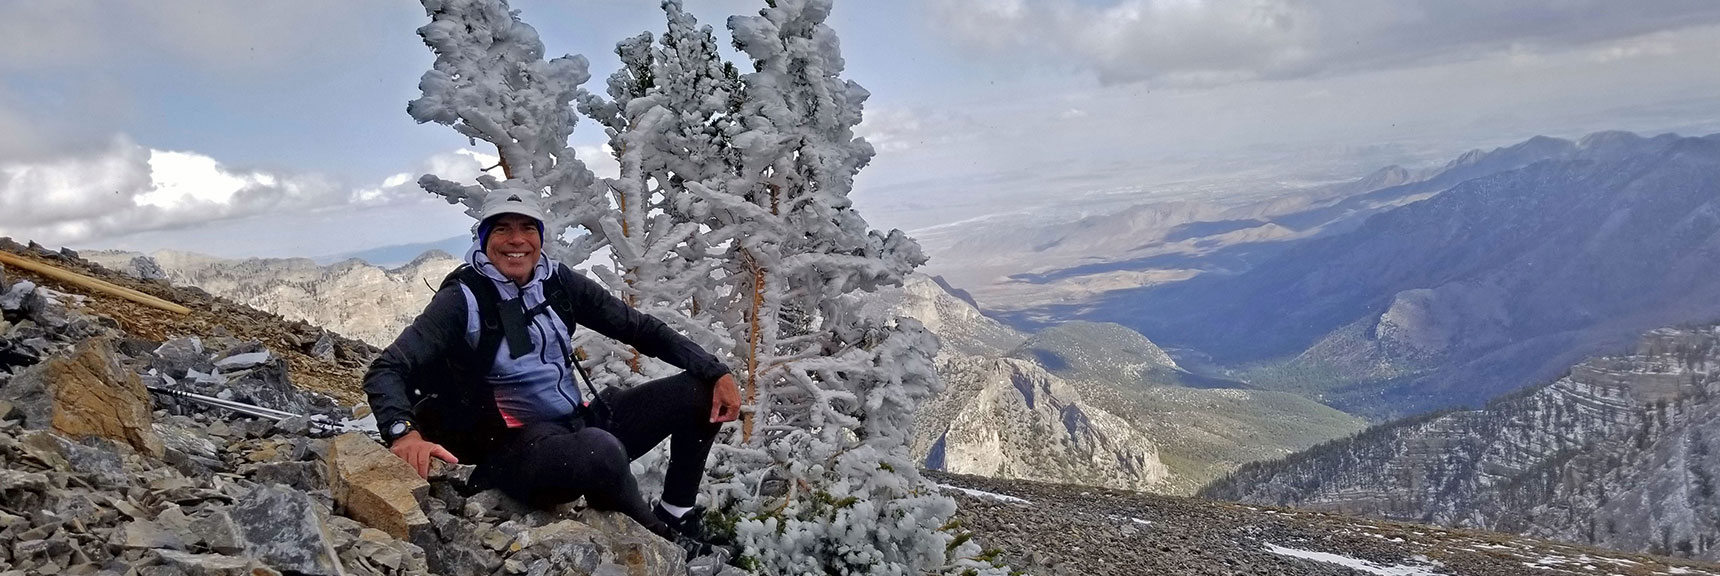 Lonely Grove of Trees Overlooking Kyle Canyon | Charleston Peak Loop October Snow Dusting | Mt. Charleston Wilderness | Spring Mountains, Nevada